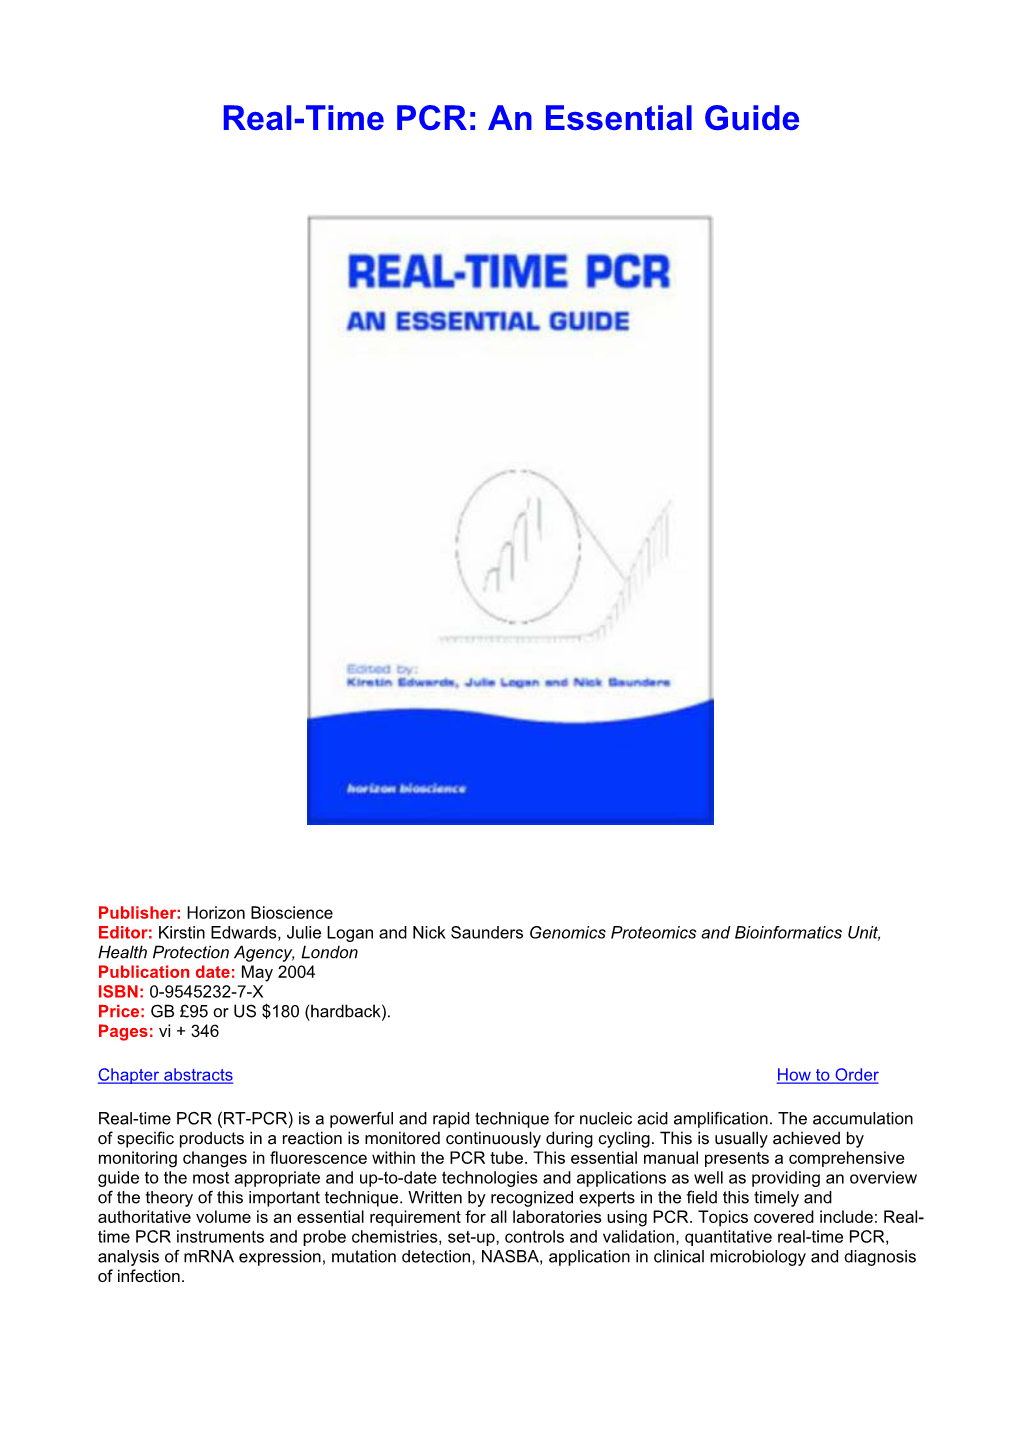 Real-Time PCR: an Essential Guide